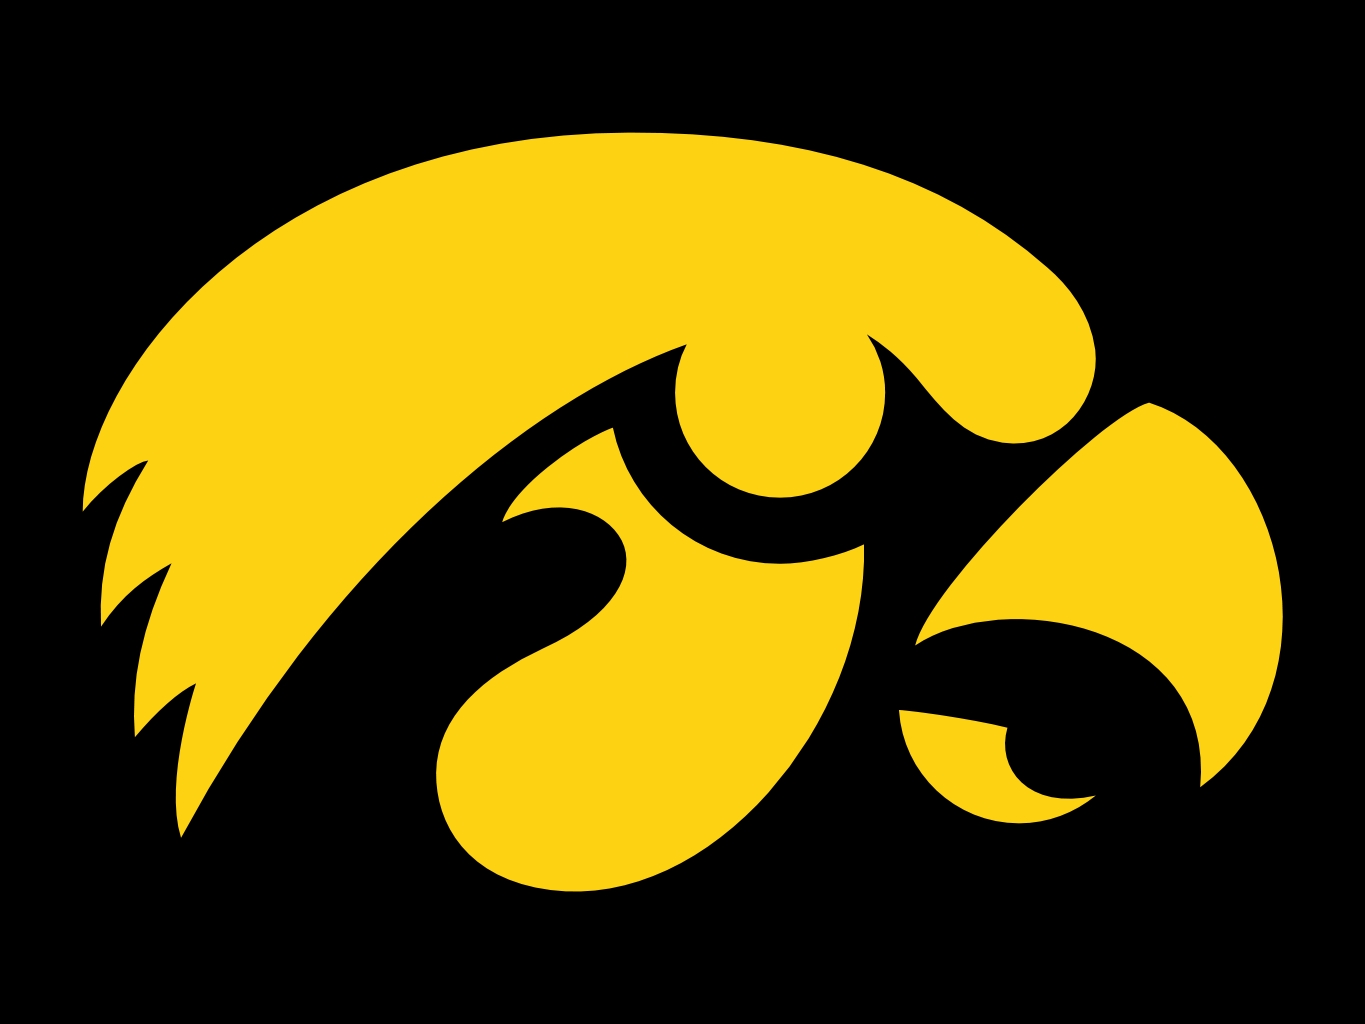 Iowa hawkeyes logo | Goods and internet. All about shopping